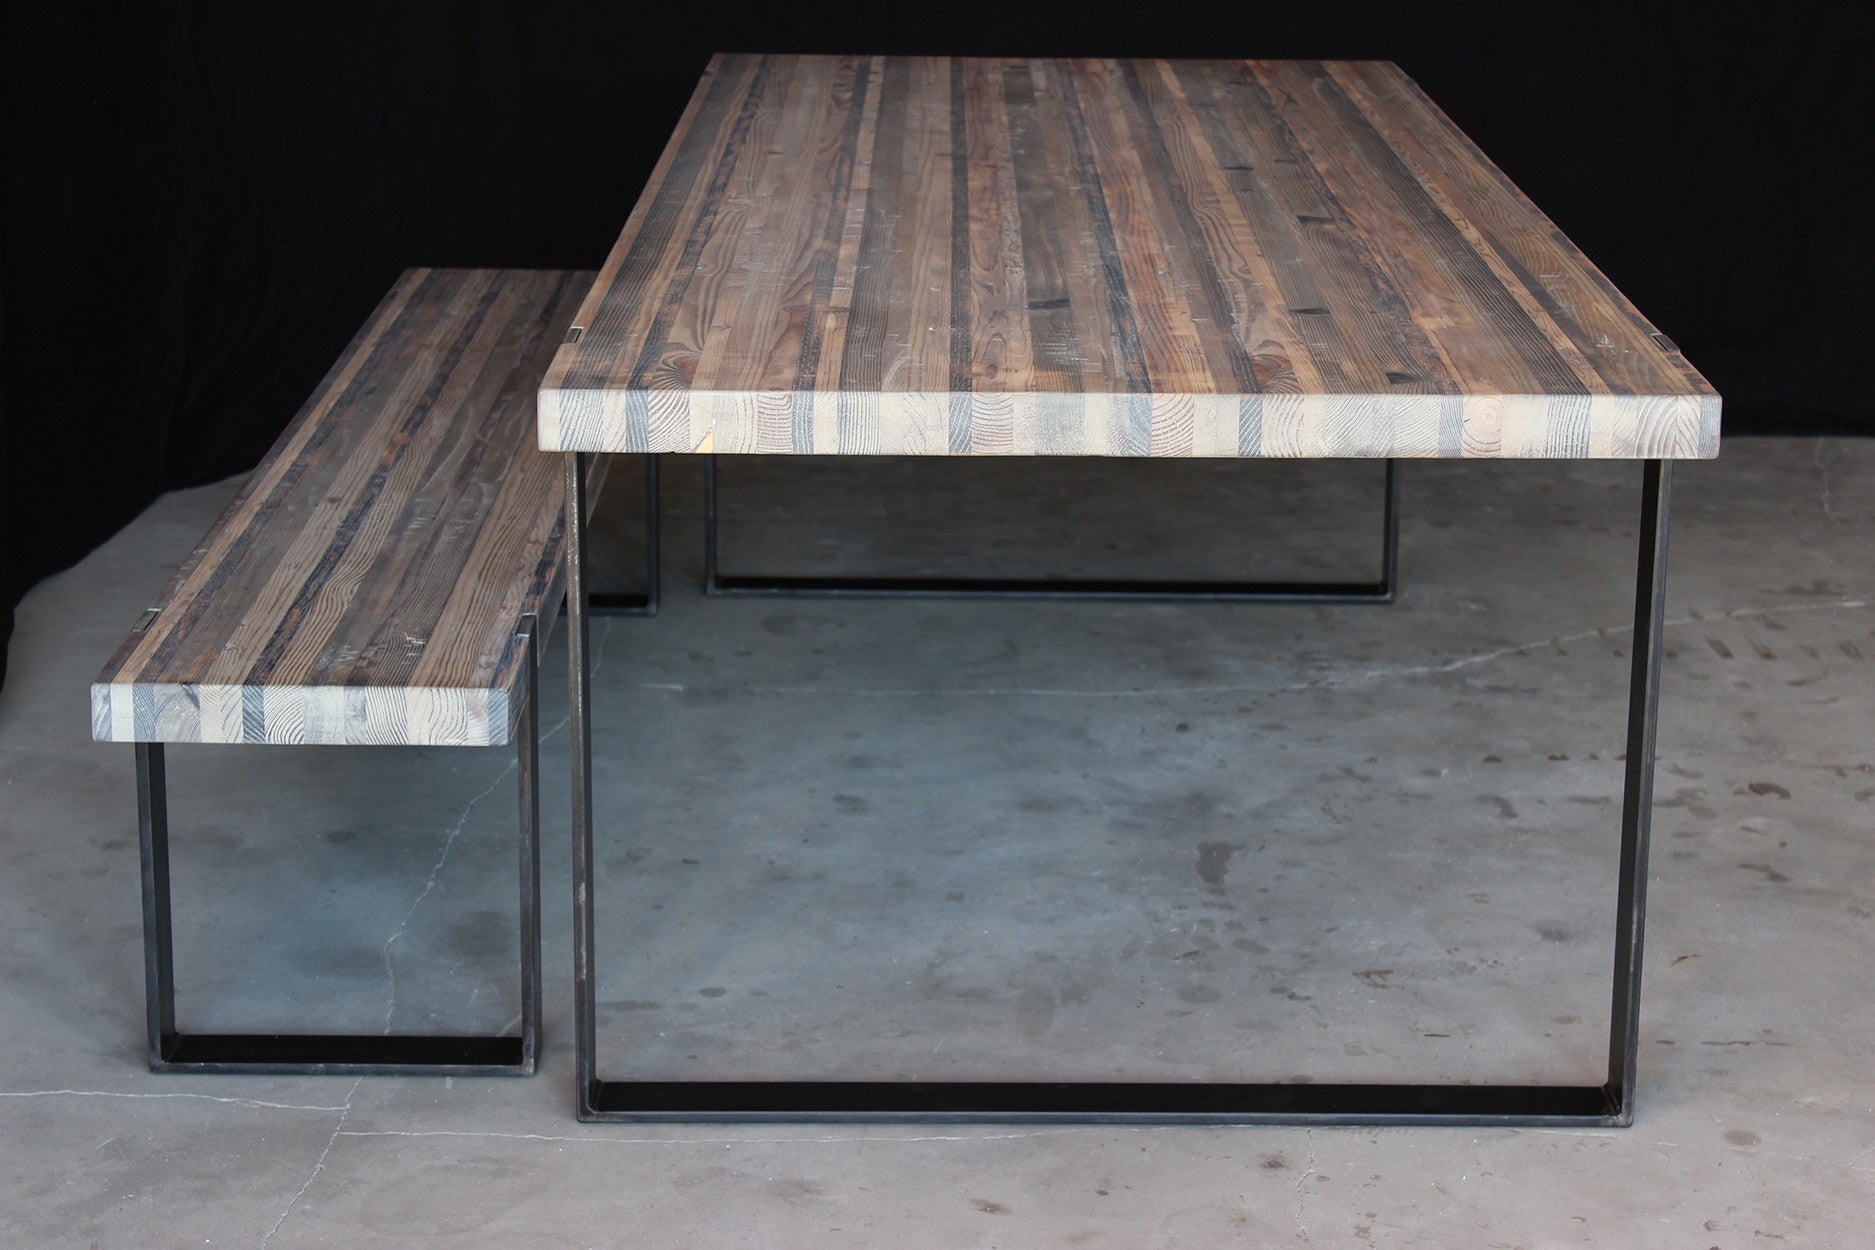 8' original dining table | aged wood finish with waxed steel